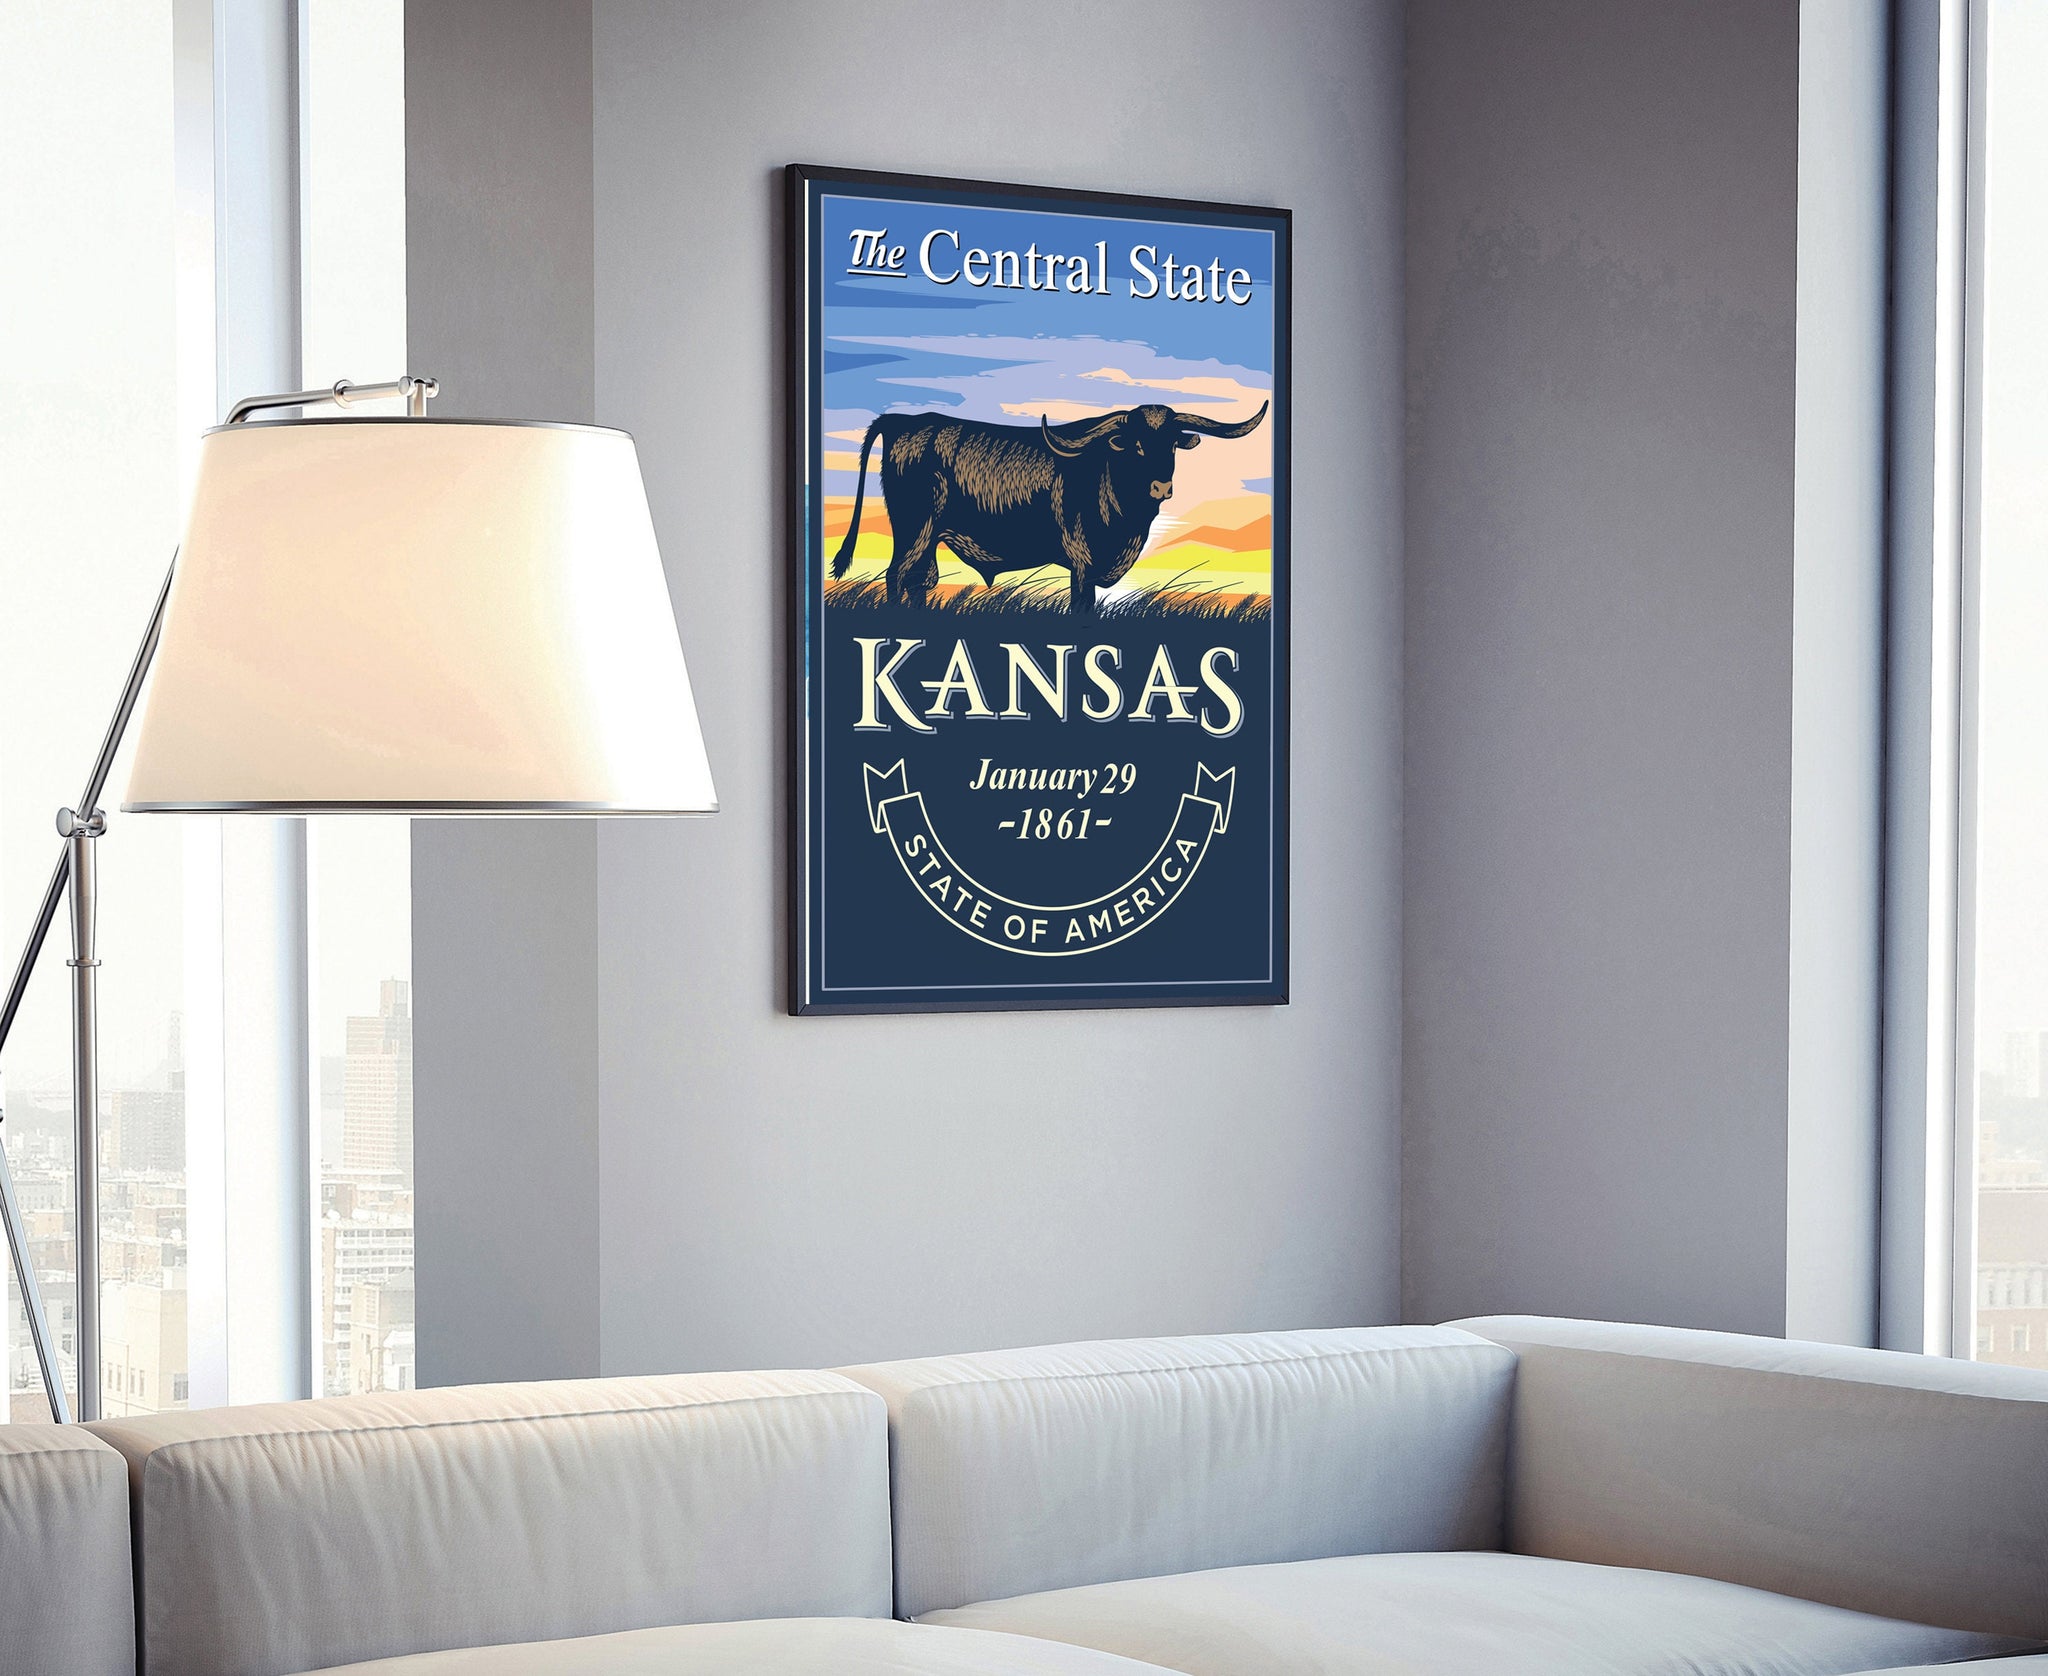 United States Poster, Kansas State Poster Print, Kansas State Emblem Poster, Retro Travel State Poster, Home Wall Art, Office Wall Art